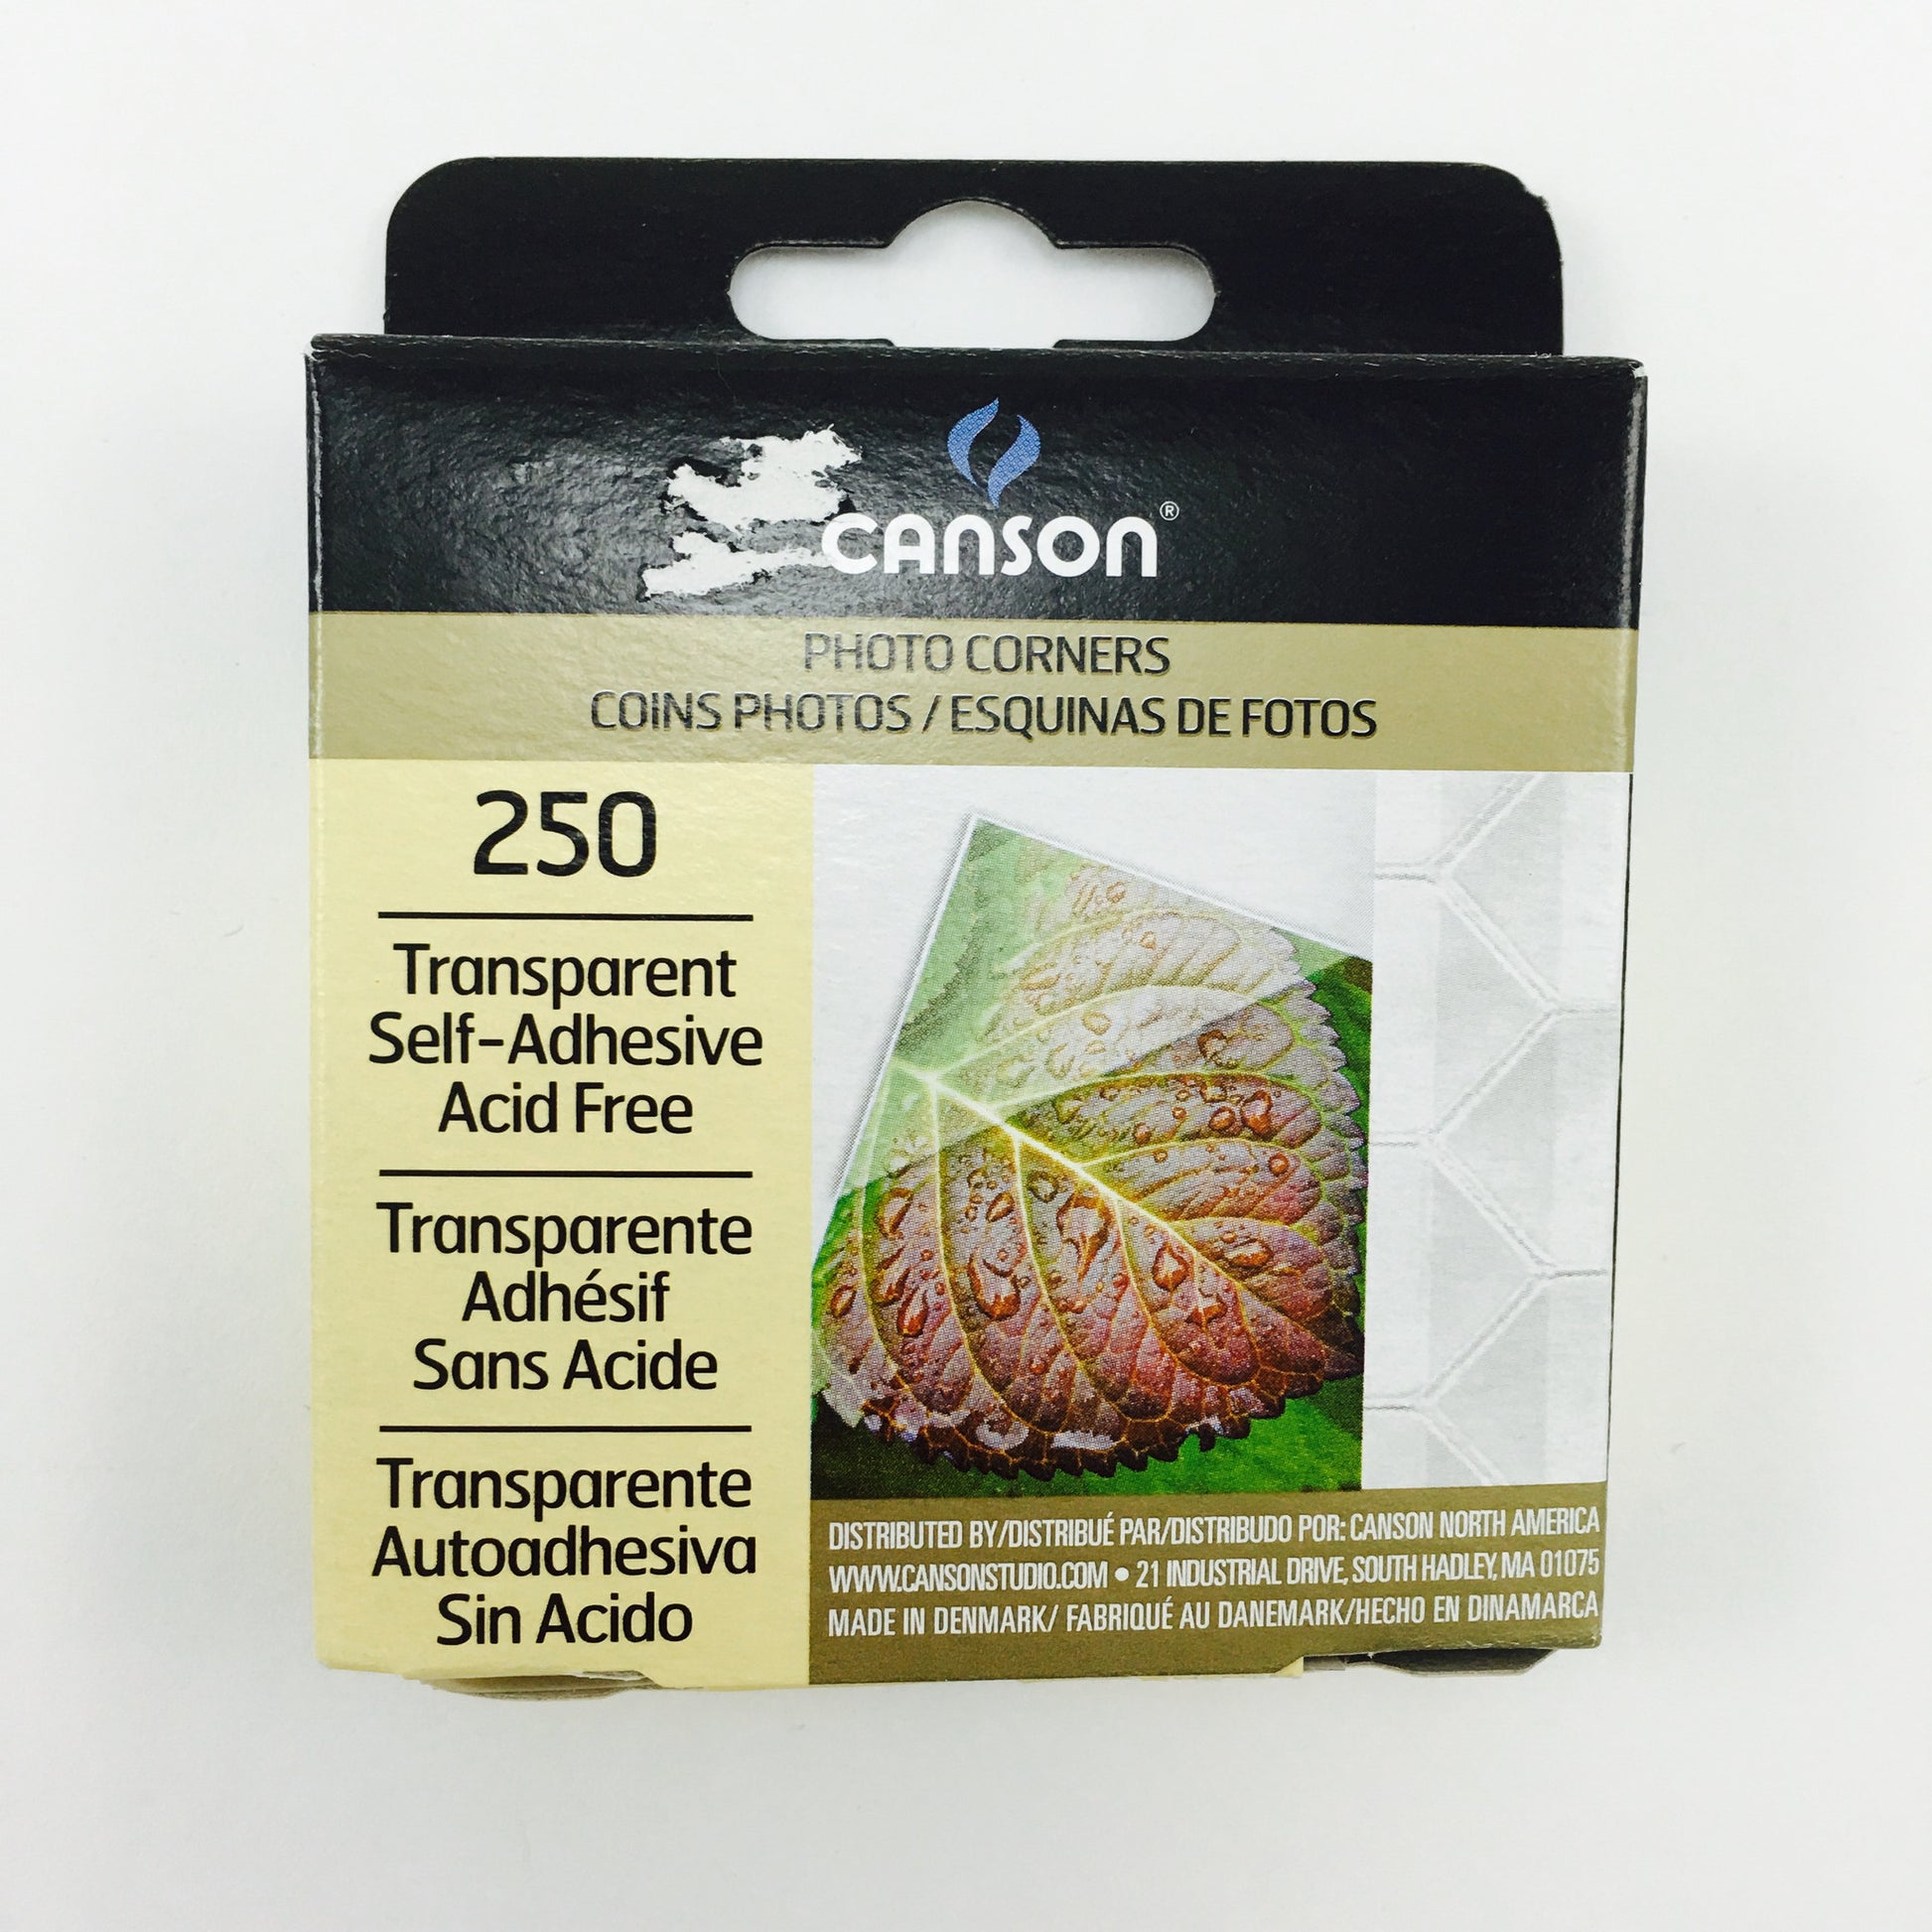 Canson Photo Corners Transparent Self-Adhesive (250 Pack) - by Canson - K. A. Artist Shop